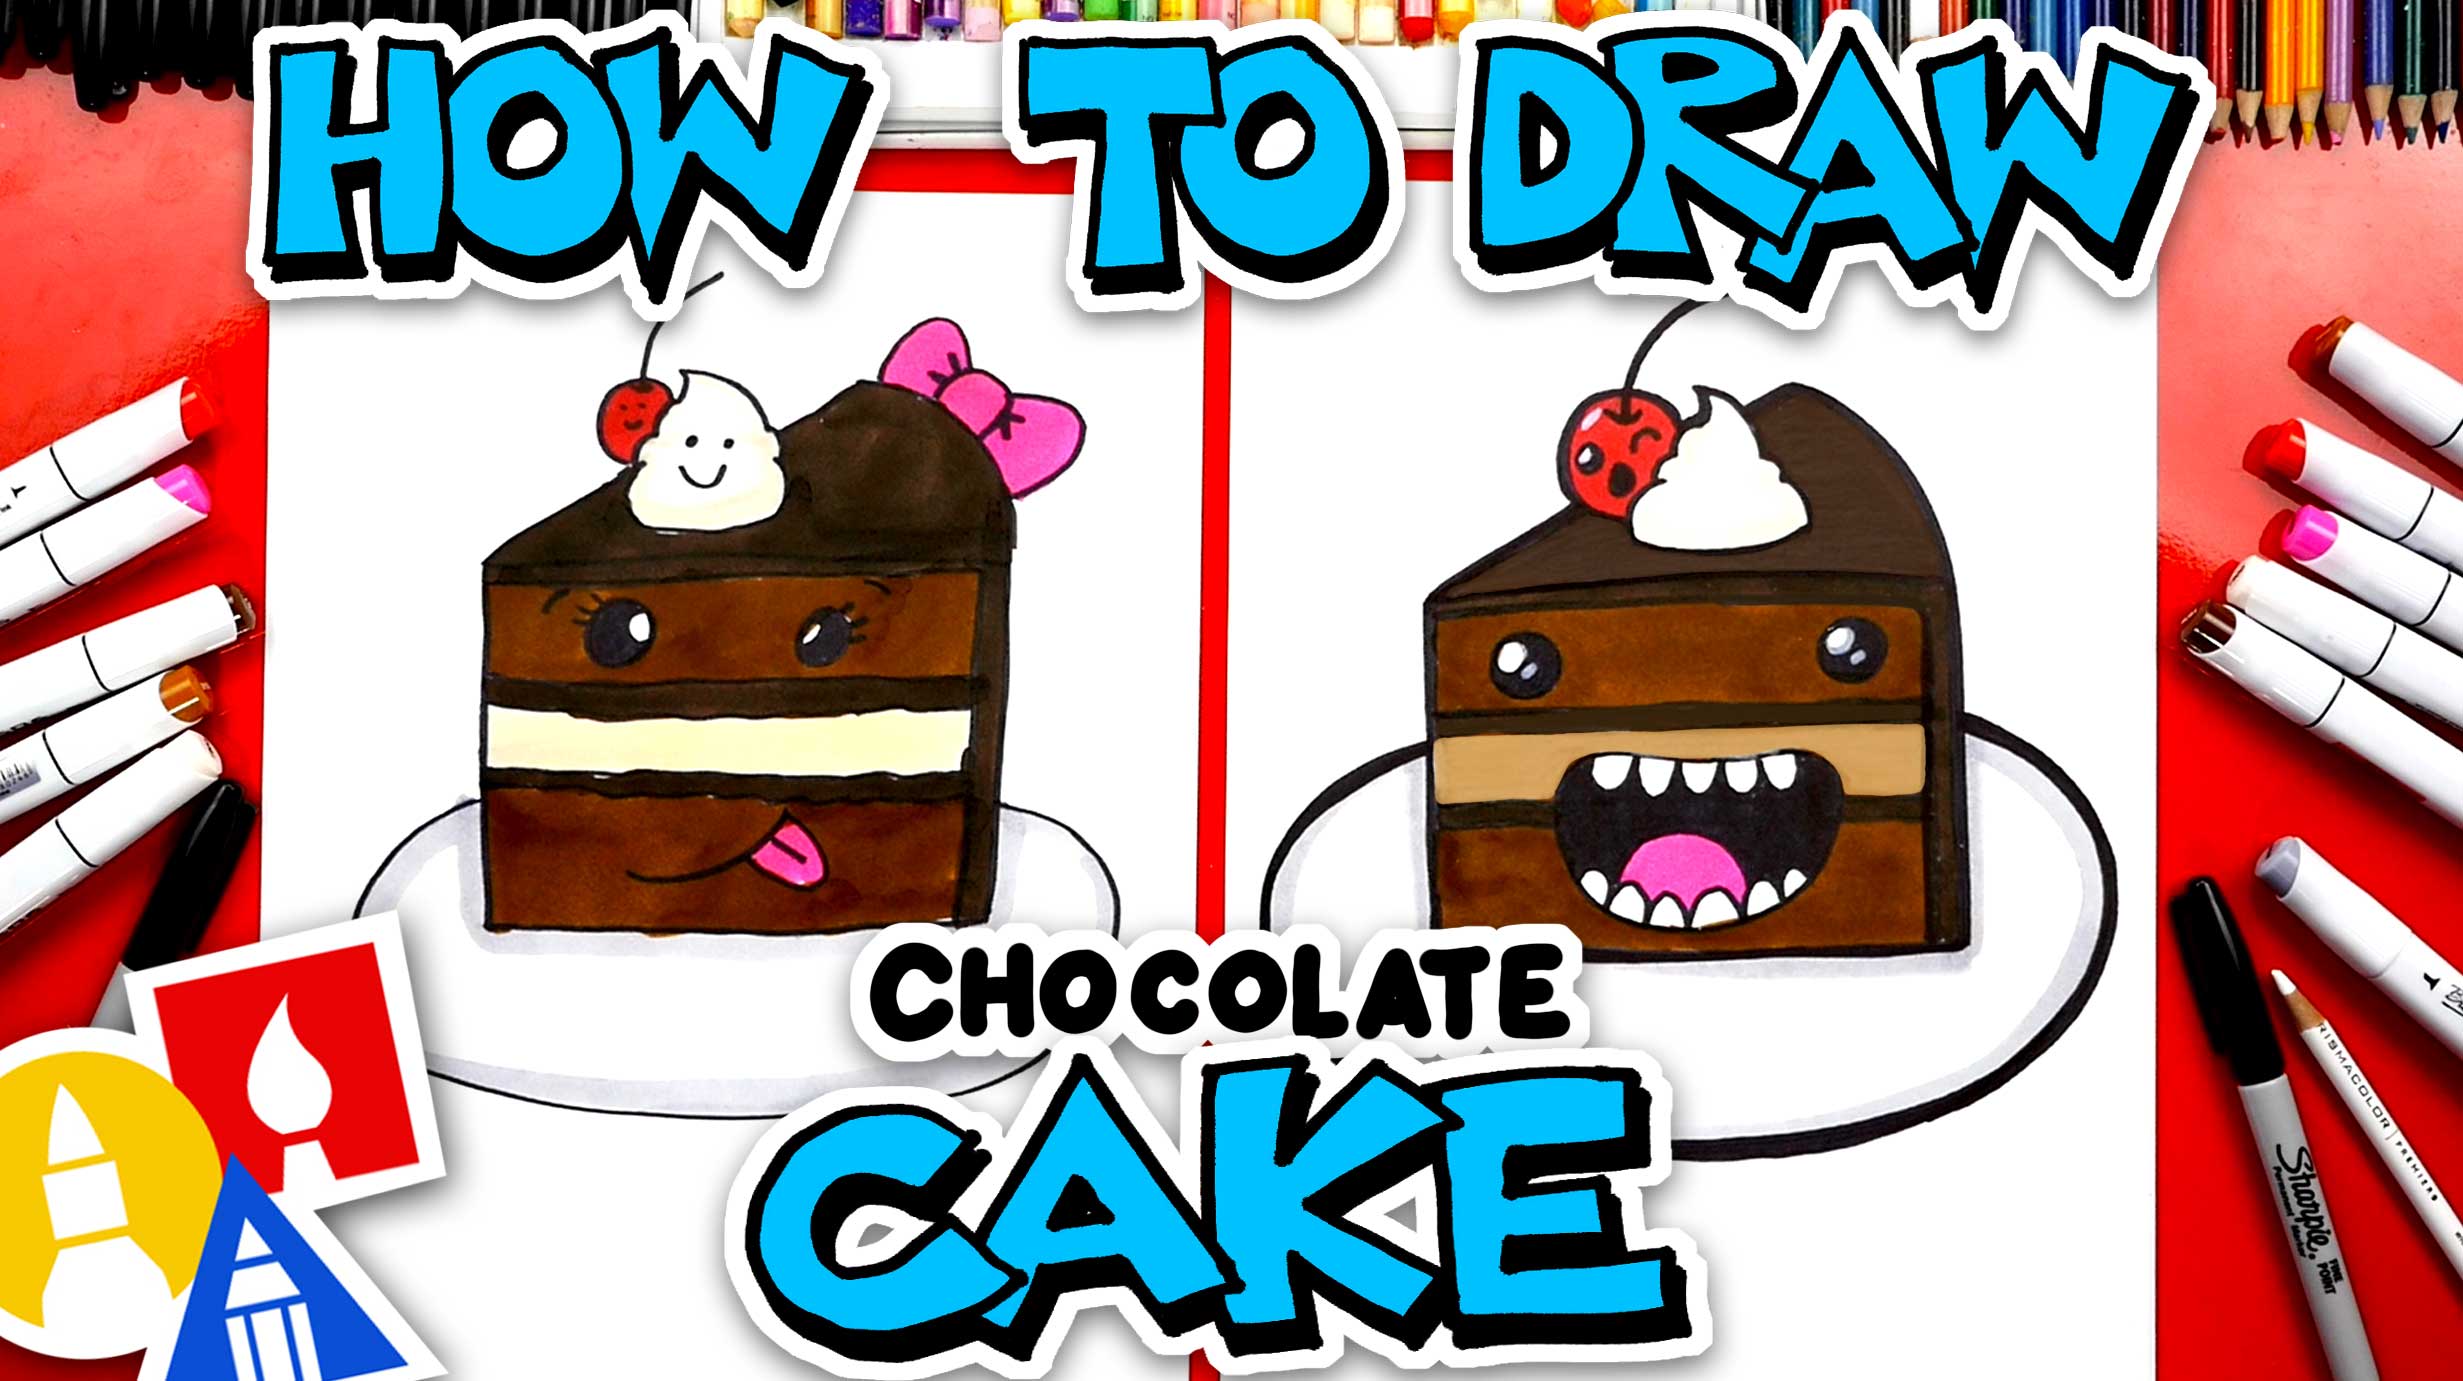 How To Draw Funny Chocolate Cake - Art For Kids Hub